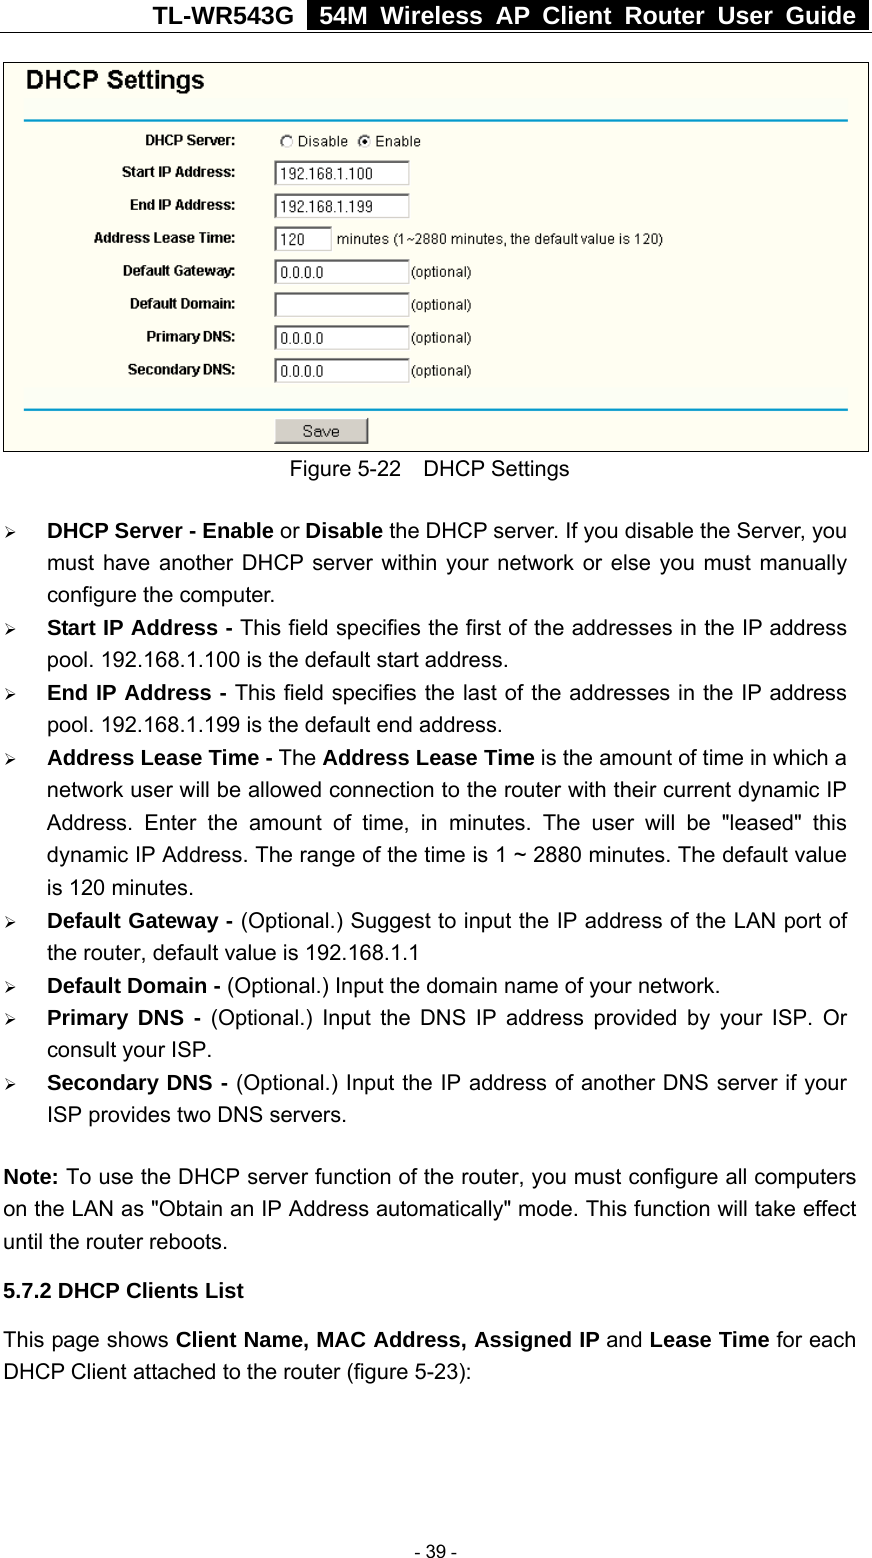 TL-WR543G   54M Wireless AP Client Router User Guide   Figure 5-22  DHCP Settings ¾ DHCP Server - Enable or Disable the DHCP server. If you disable the Server, you must have another DHCP server within your network or else you must manually configure the computer. ¾ Start IP Address - This field specifies the first of the addresses in the IP address pool. 192.168.1.100 is the default start address. ¾ End IP Address - This field specifies the last of the addresses in the IP address pool. 192.168.1.199 is the default end address. ¾ Address Lease Time - The Address Lease Time is the amount of time in which a network user will be allowed connection to the router with their current dynamic IP Address. Enter the amount of time, in minutes. The user will be &quot;leased&quot; this dynamic IP Address. The range of the time is 1 ~ 2880 minutes. The default value is 120 minutes. ¾ Default Gateway - (Optional.) Suggest to input the IP address of the LAN port of the router, default value is 192.168.1.1 ¾ Default Domain - (Optional.) Input the domain name of your network. ¾ Primary DNS - (Optional.) Input the DNS IP address provided by your ISP. Or consult your ISP. ¾ Secondary DNS - (Optional.) Input the IP address of another DNS server if your ISP provides two DNS servers. Note: To use the DHCP server function of the router, you must configure all computers on the LAN as &quot;Obtain an IP Address automatically&quot; mode. This function will take effect until the router reboots. 5.7.2 DHCP Clients List This page shows Client Name, MAC Address, Assigned IP and Lease Time for each DHCP Client attached to the router (figure 5-23):  - 39 - 